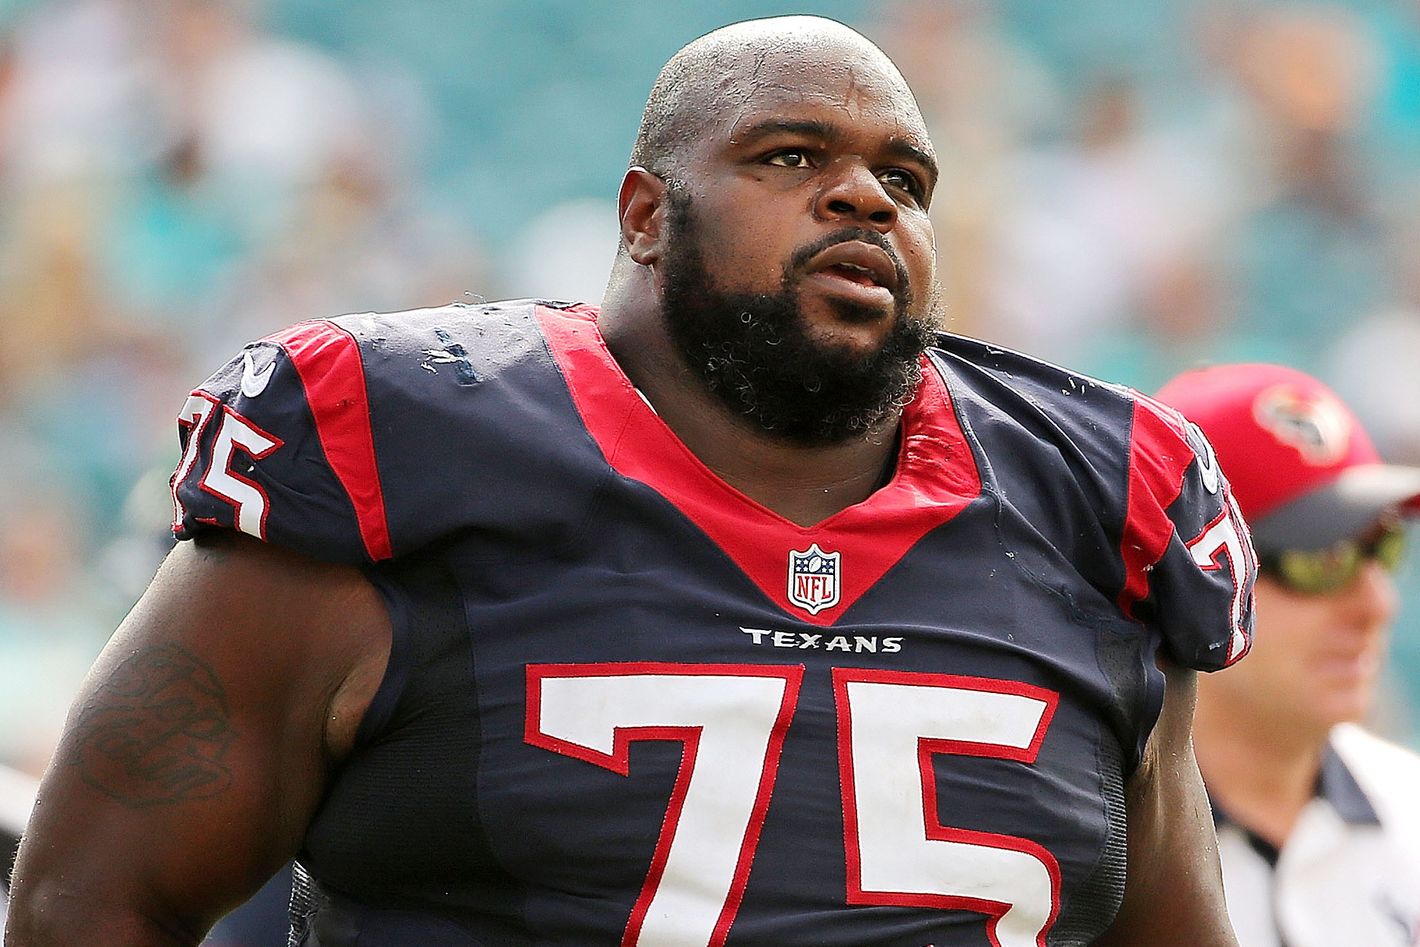 Vince Wilfork bares all '325-plus' pounds for ESPN